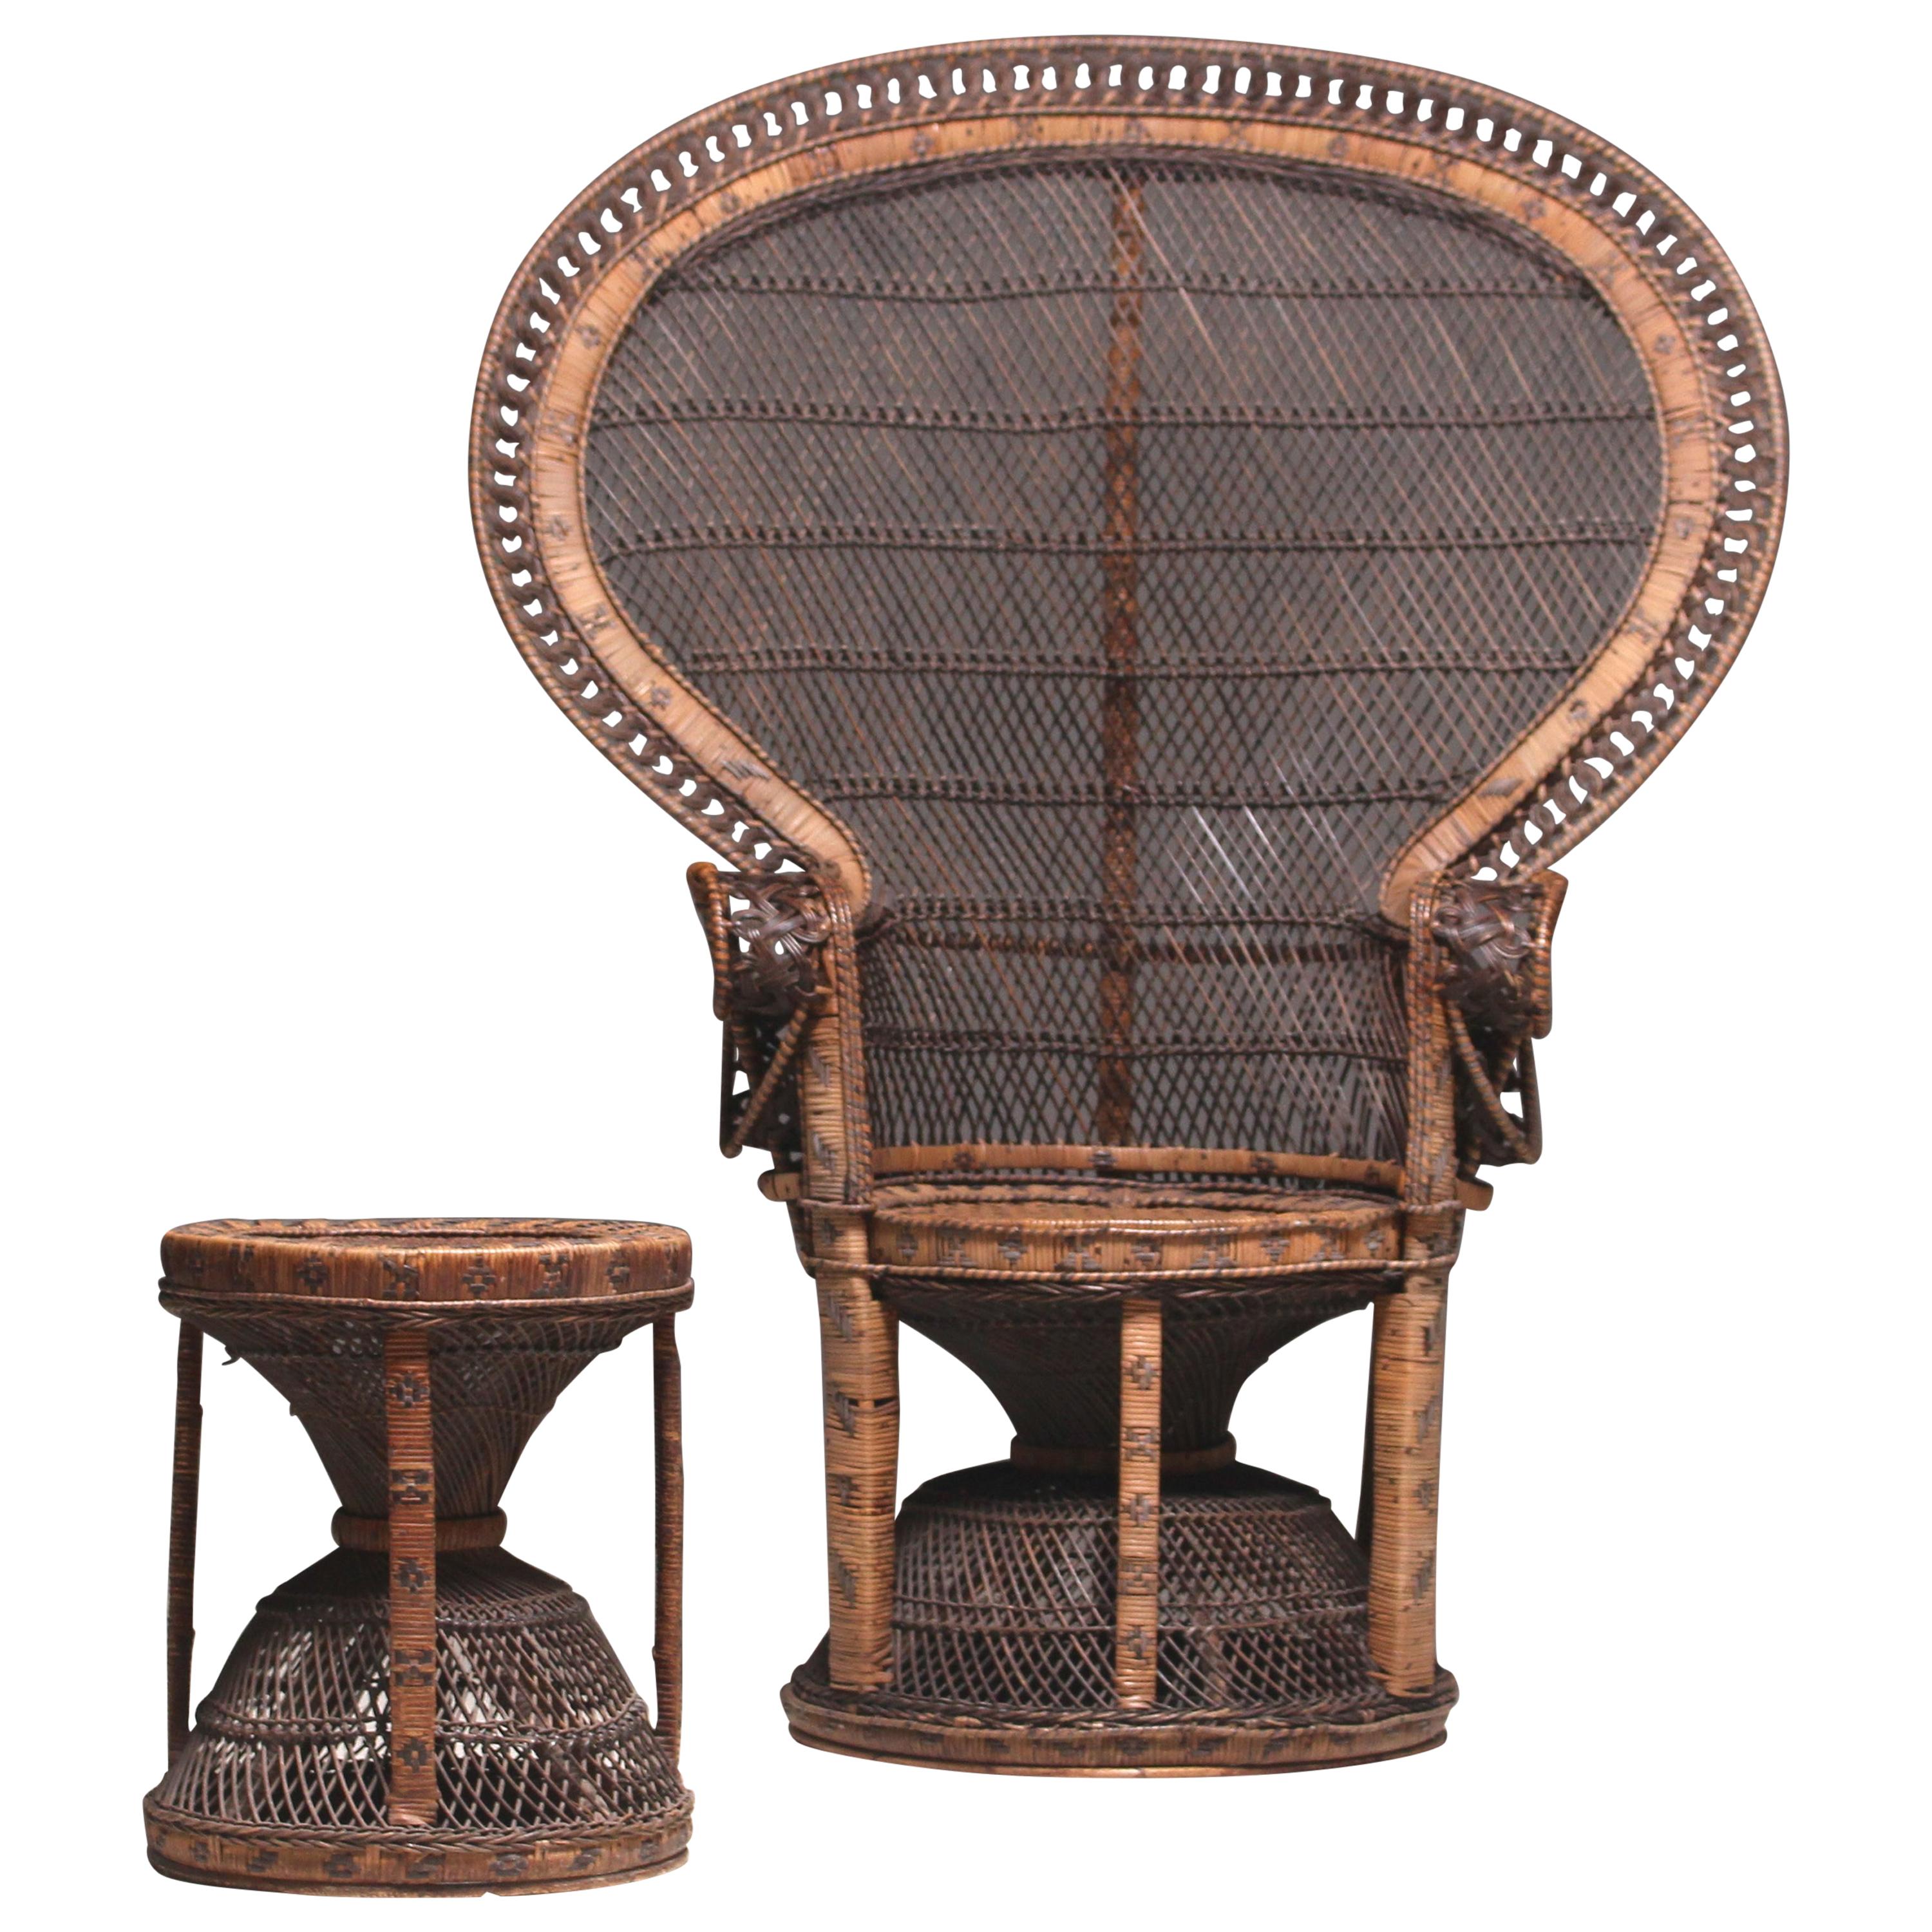 Indonesian Large Peacock Emmanuelle Chair with a Rare Stool, 1970s For Sale